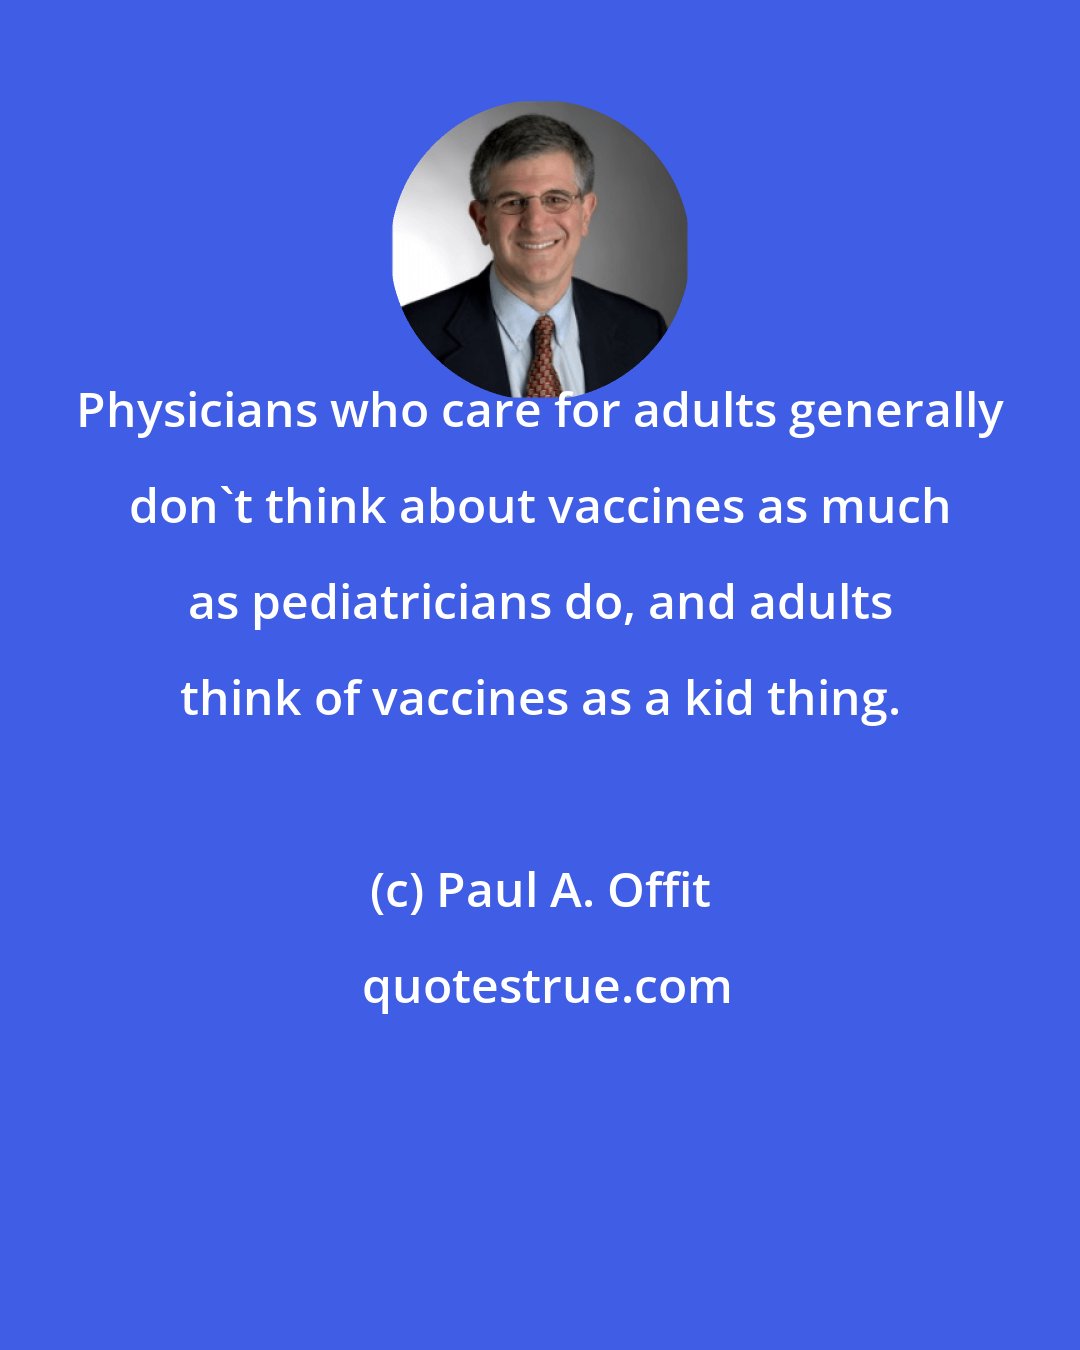 Paul A. Offit: Physicians who care for adults generally don't think about vaccines as much as pediatricians do, and adults think of vaccines as a kid thing.